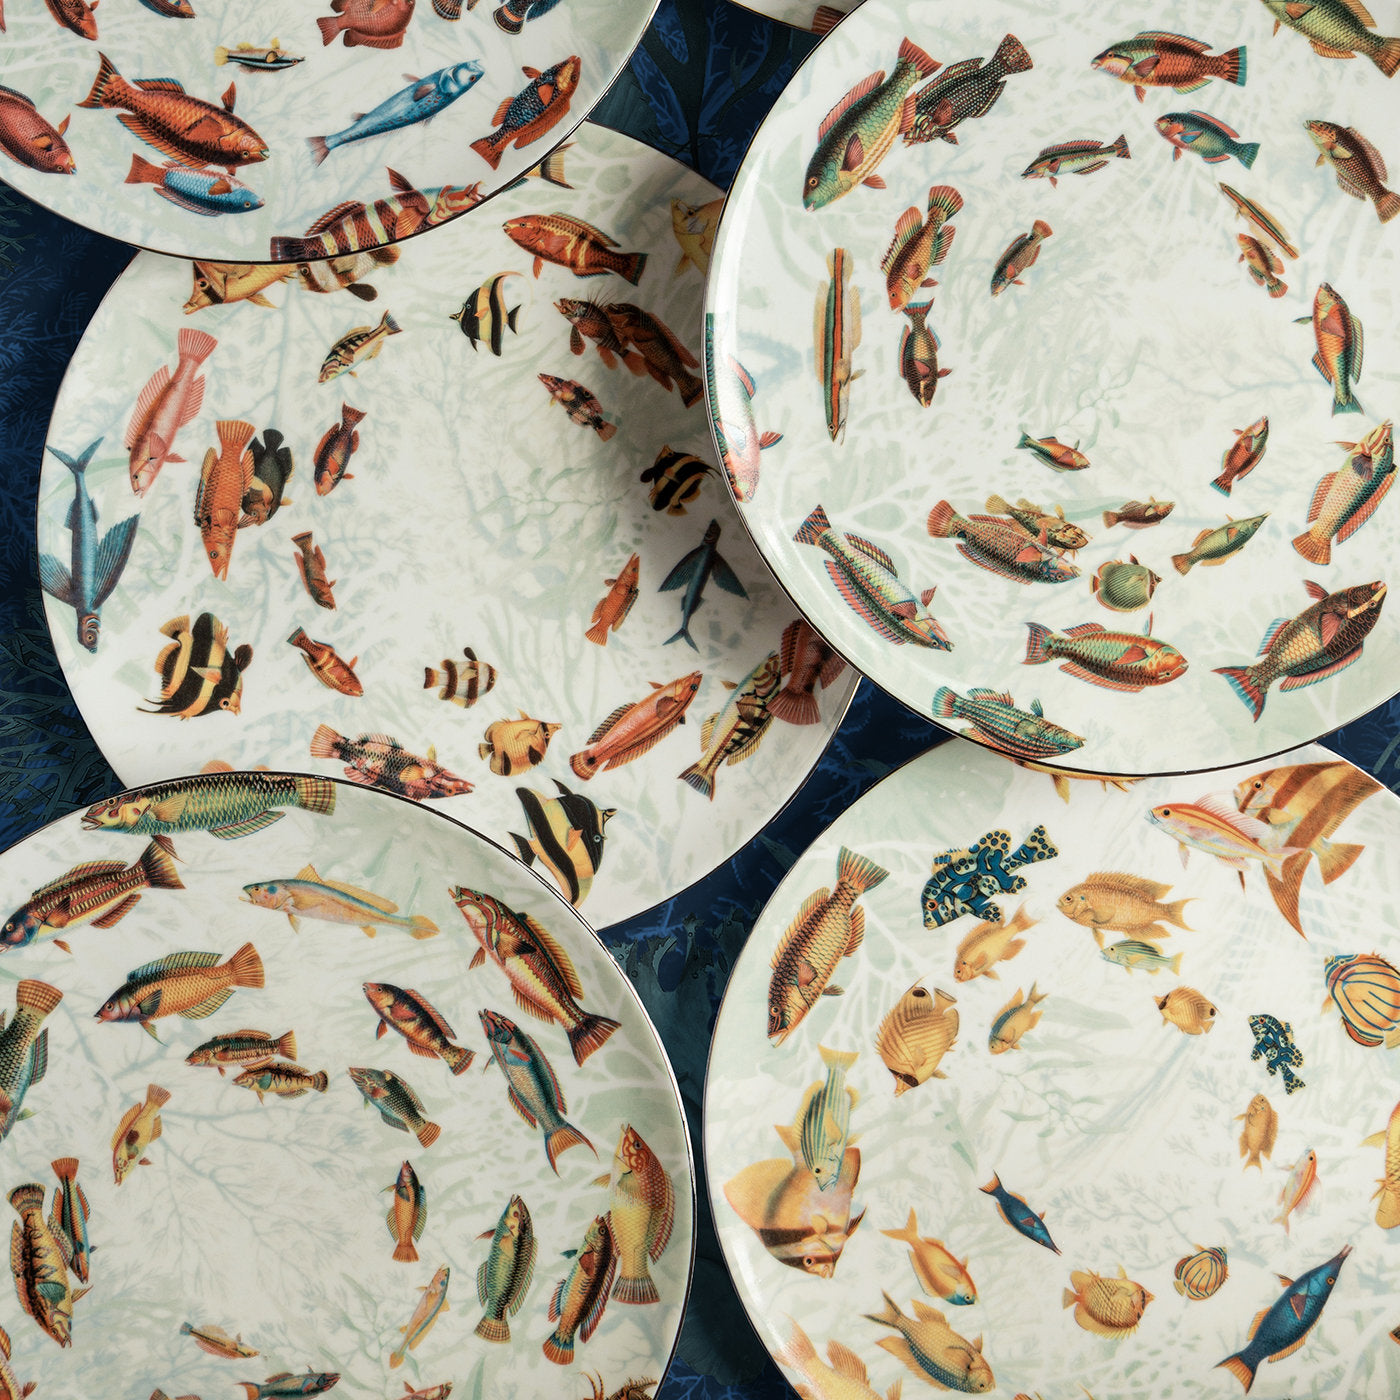 Amami Porcelain Dinner Plate With Tropical Fish #5 - Alternative view 2